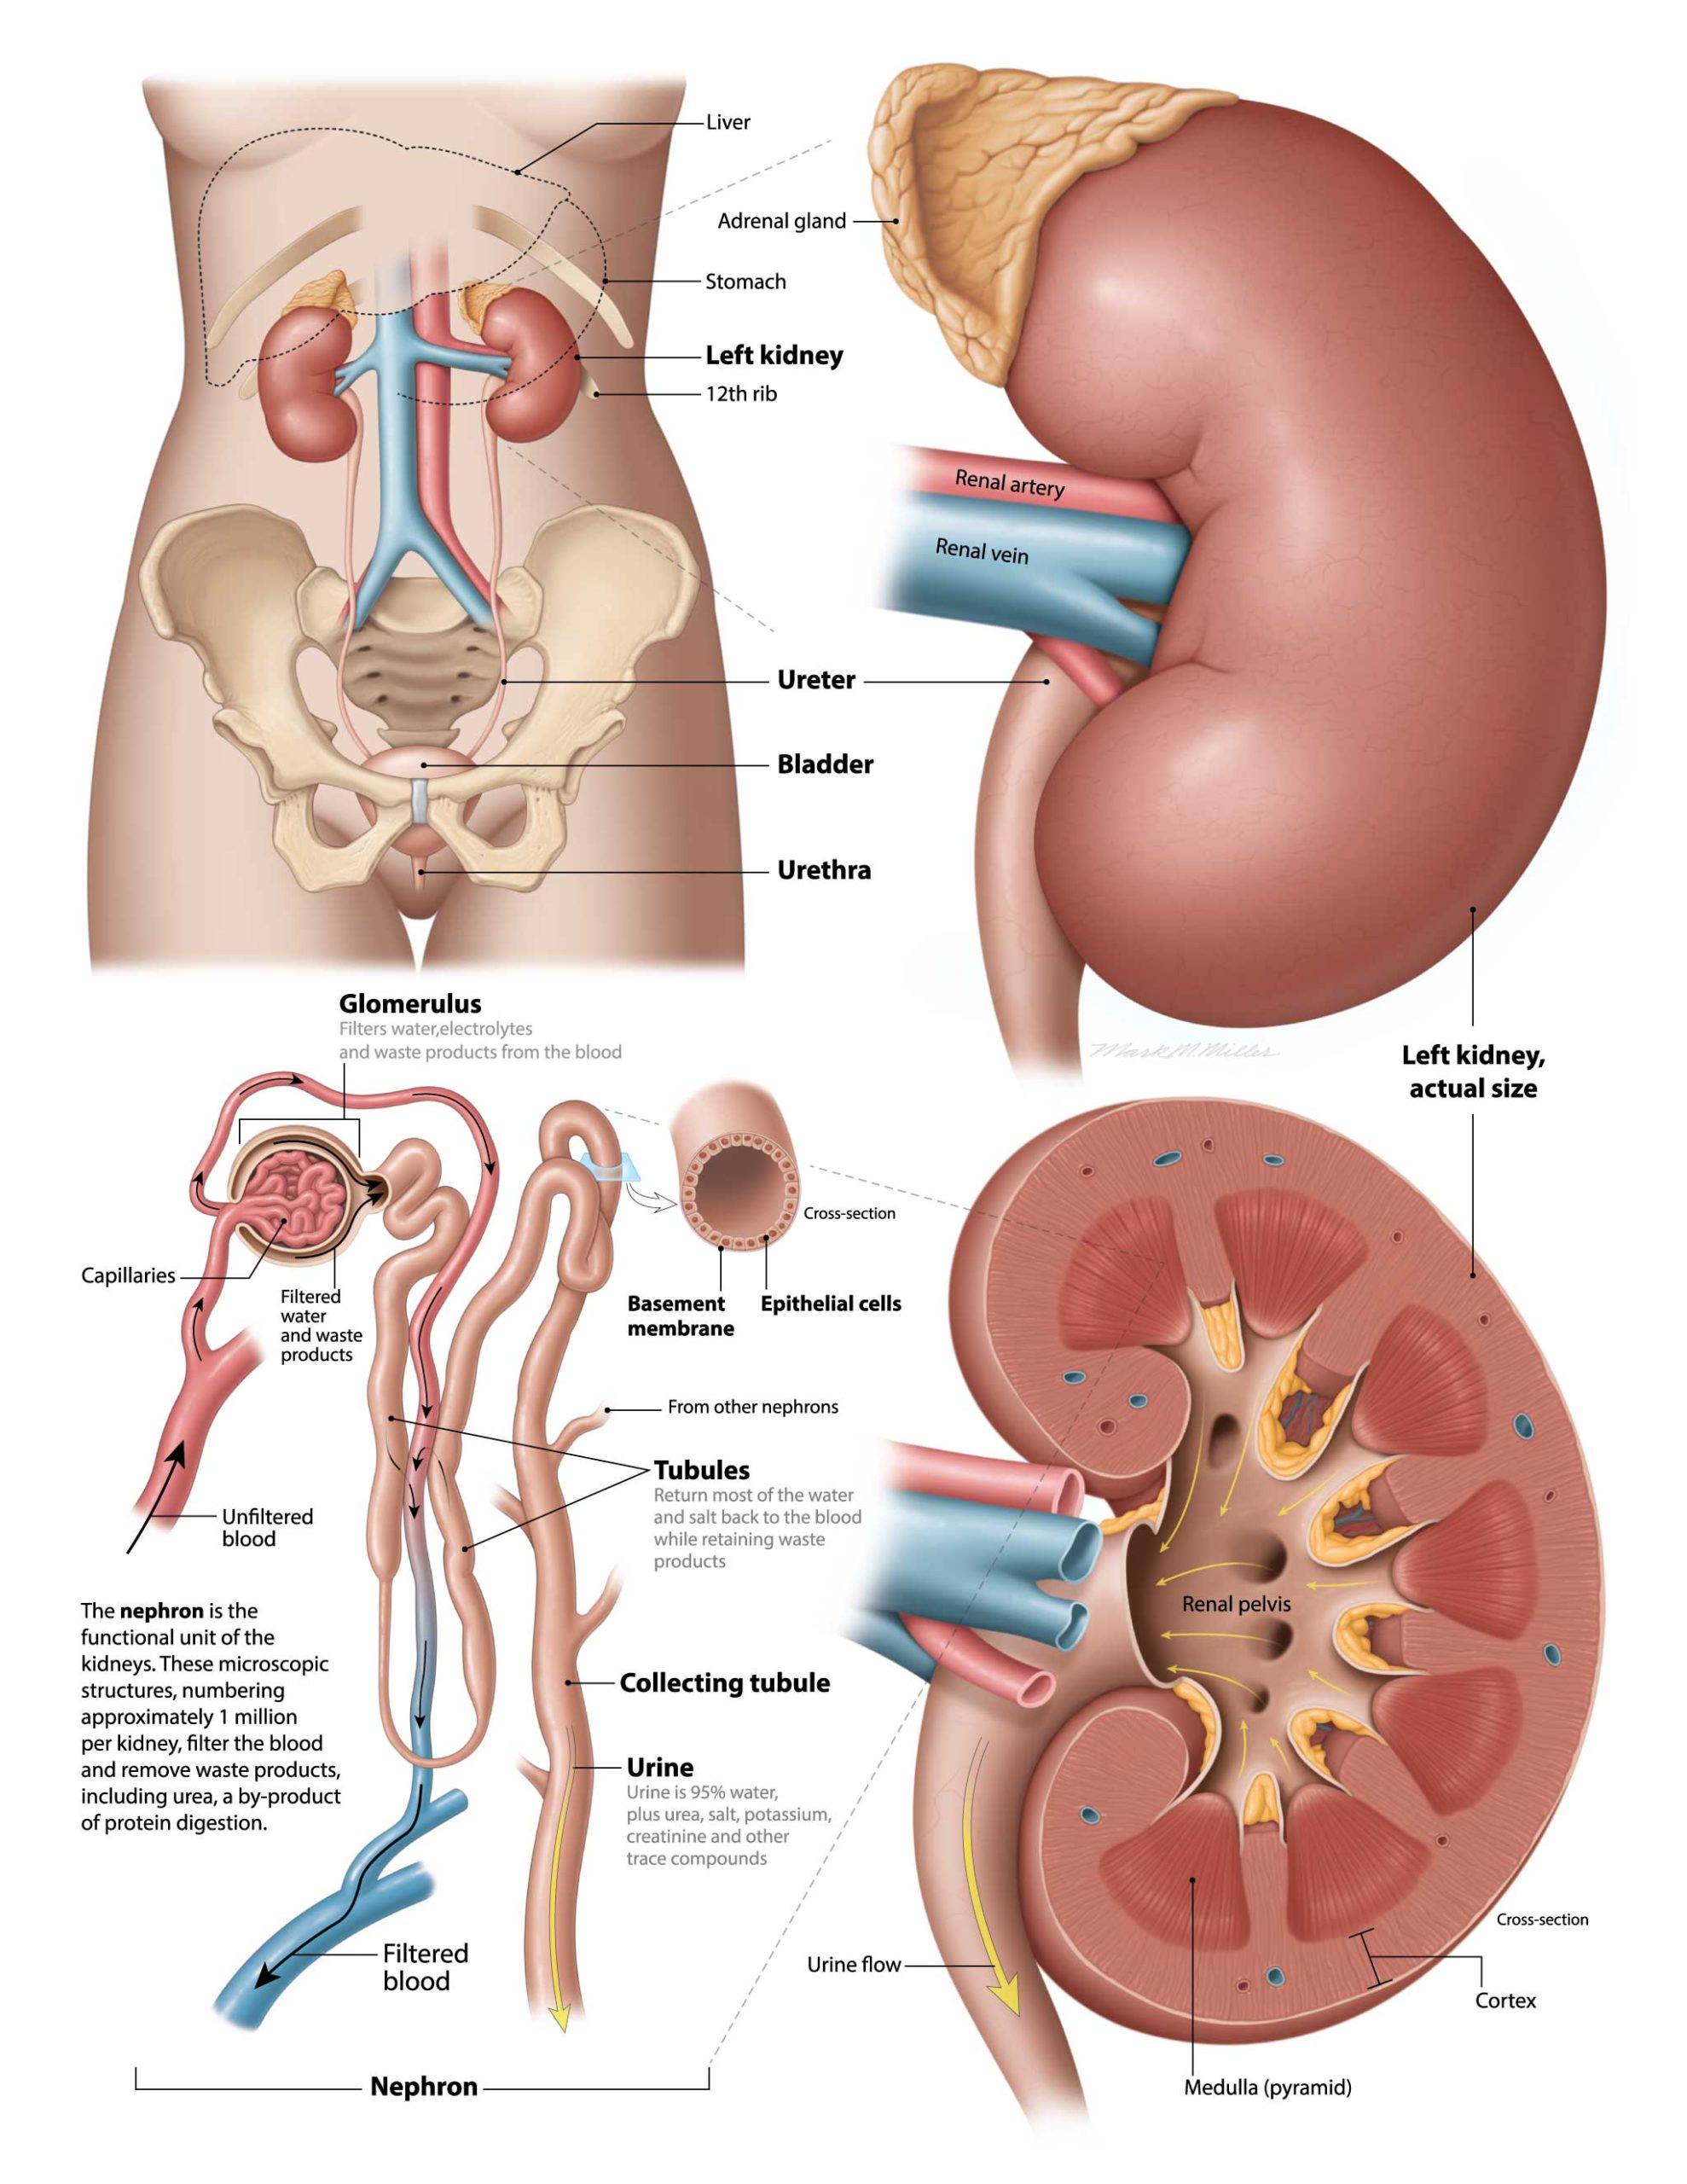 Are The Kidneys Located Inside Of The Rib Cage